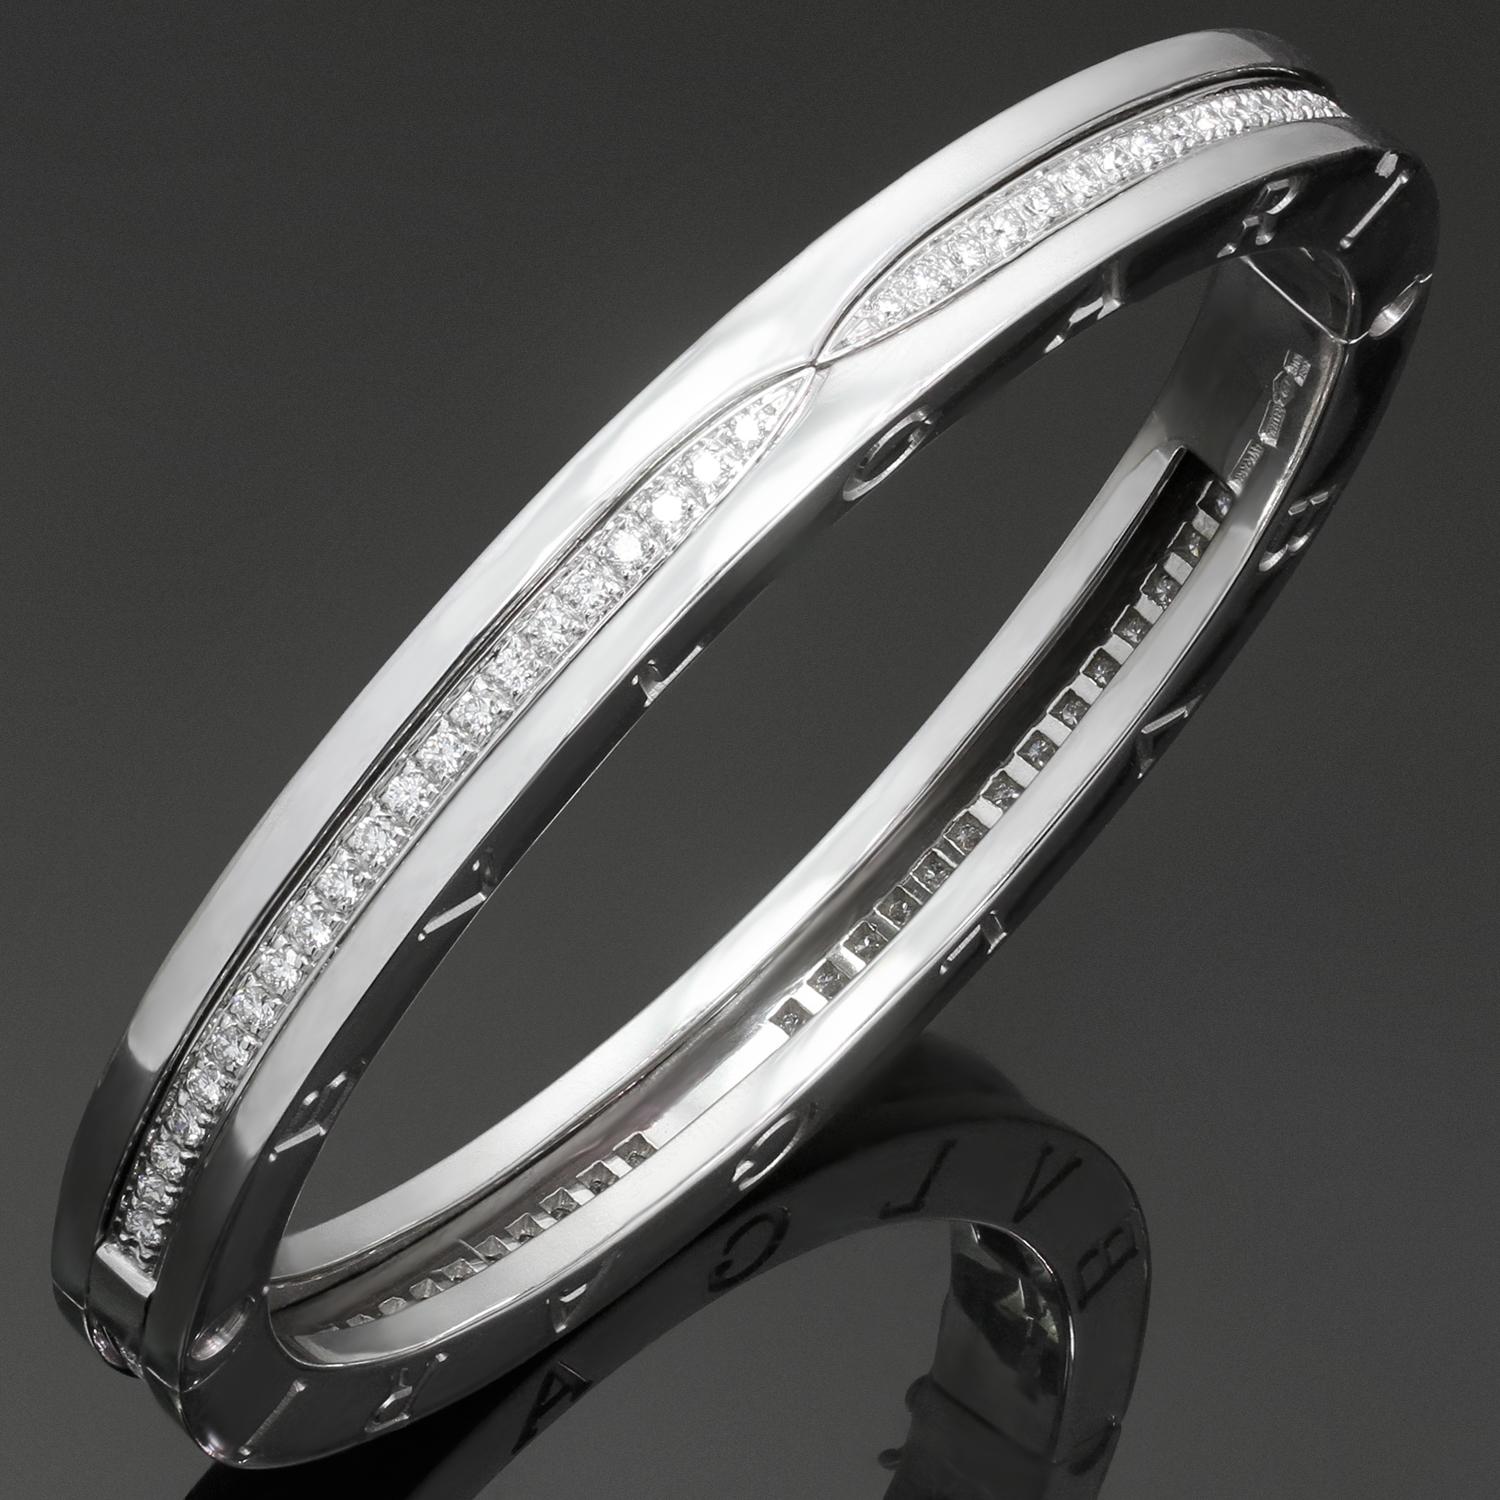 This fabulous bangle from Bulgari's iconic B.zero1 collection is crafted in 18k white gold, engraved with the Bulgari logo on both sides and pave-set with sparkling brilliant-cut round F-G VVS2-VS1 diamonds. This is the medium model of the bracelet.